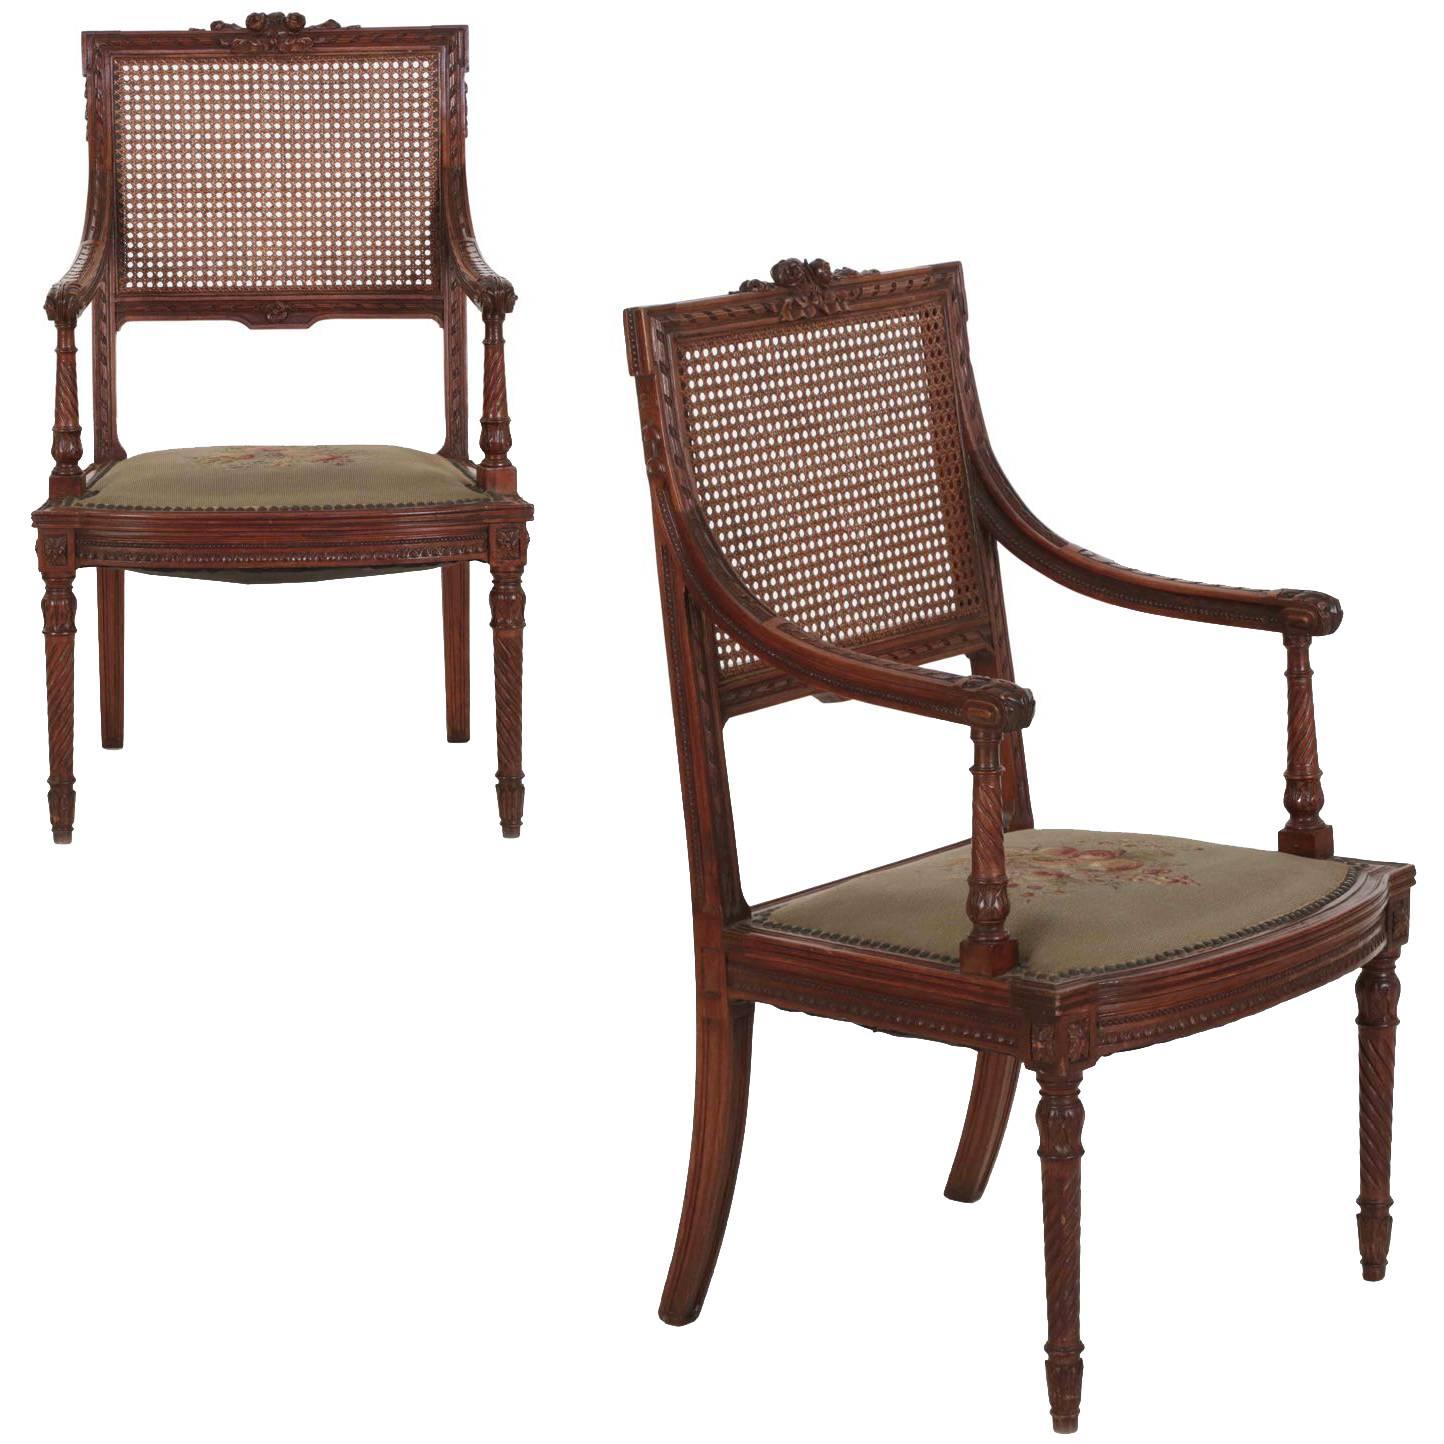 Pair of French, Louis XVI Style Carved Walnut Antique Armchairs, circa 1890